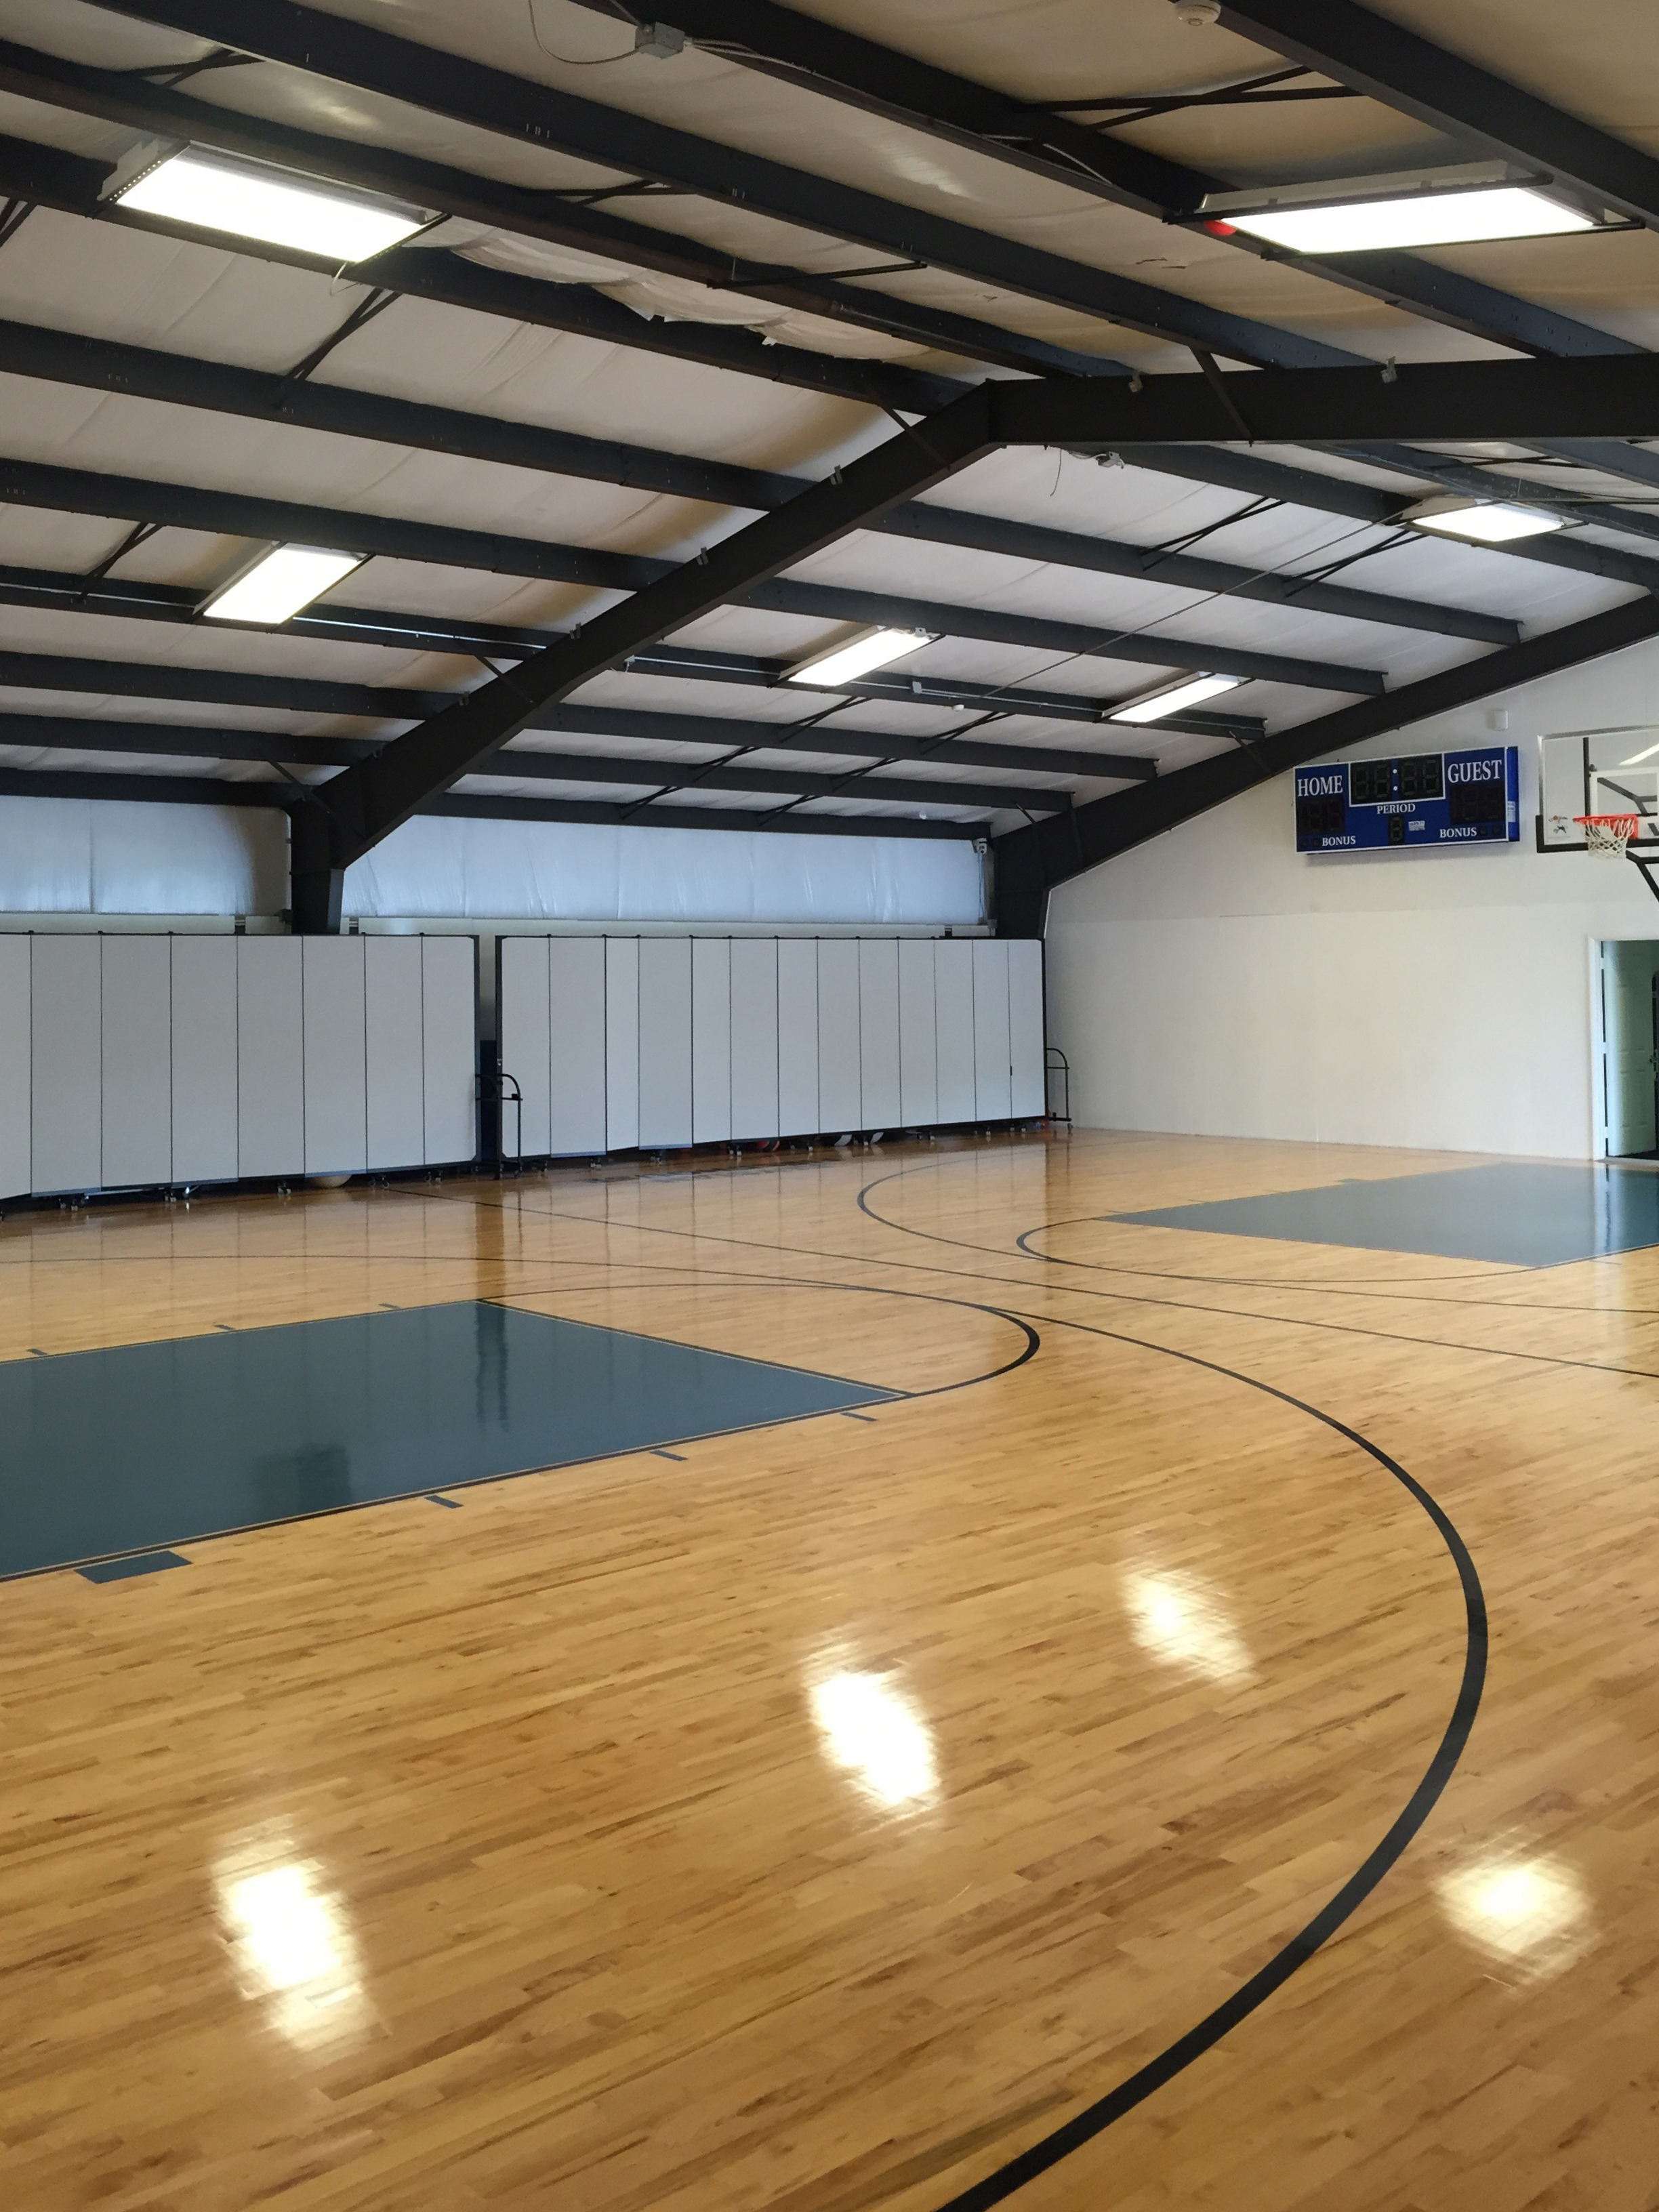 An open gym with room dividers extended along the rear wall